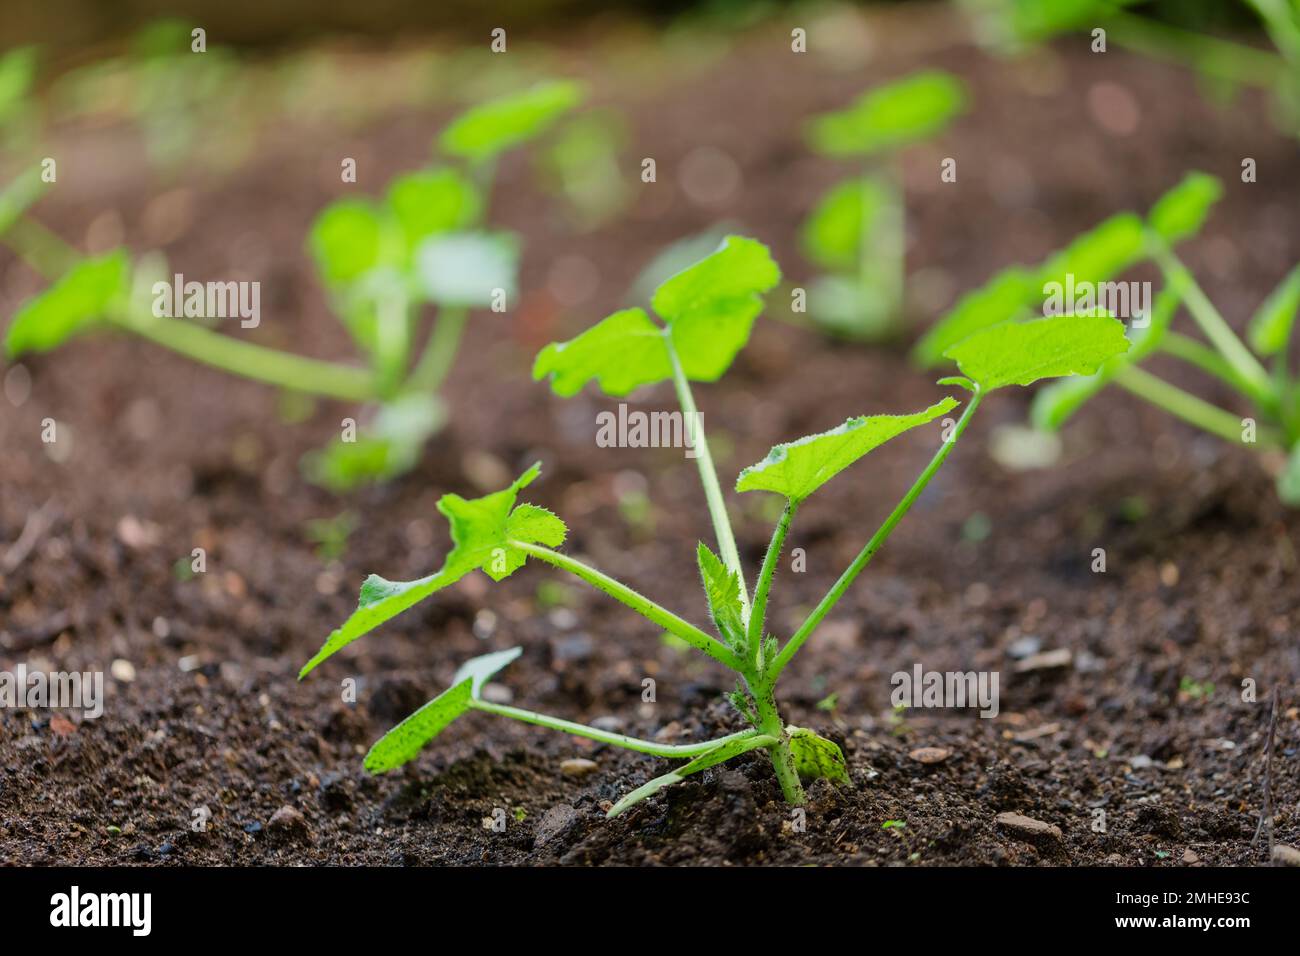 Marrow or Zucchini sprout growing in a garden seedbed - homegrown vegetables concept Stock Photo